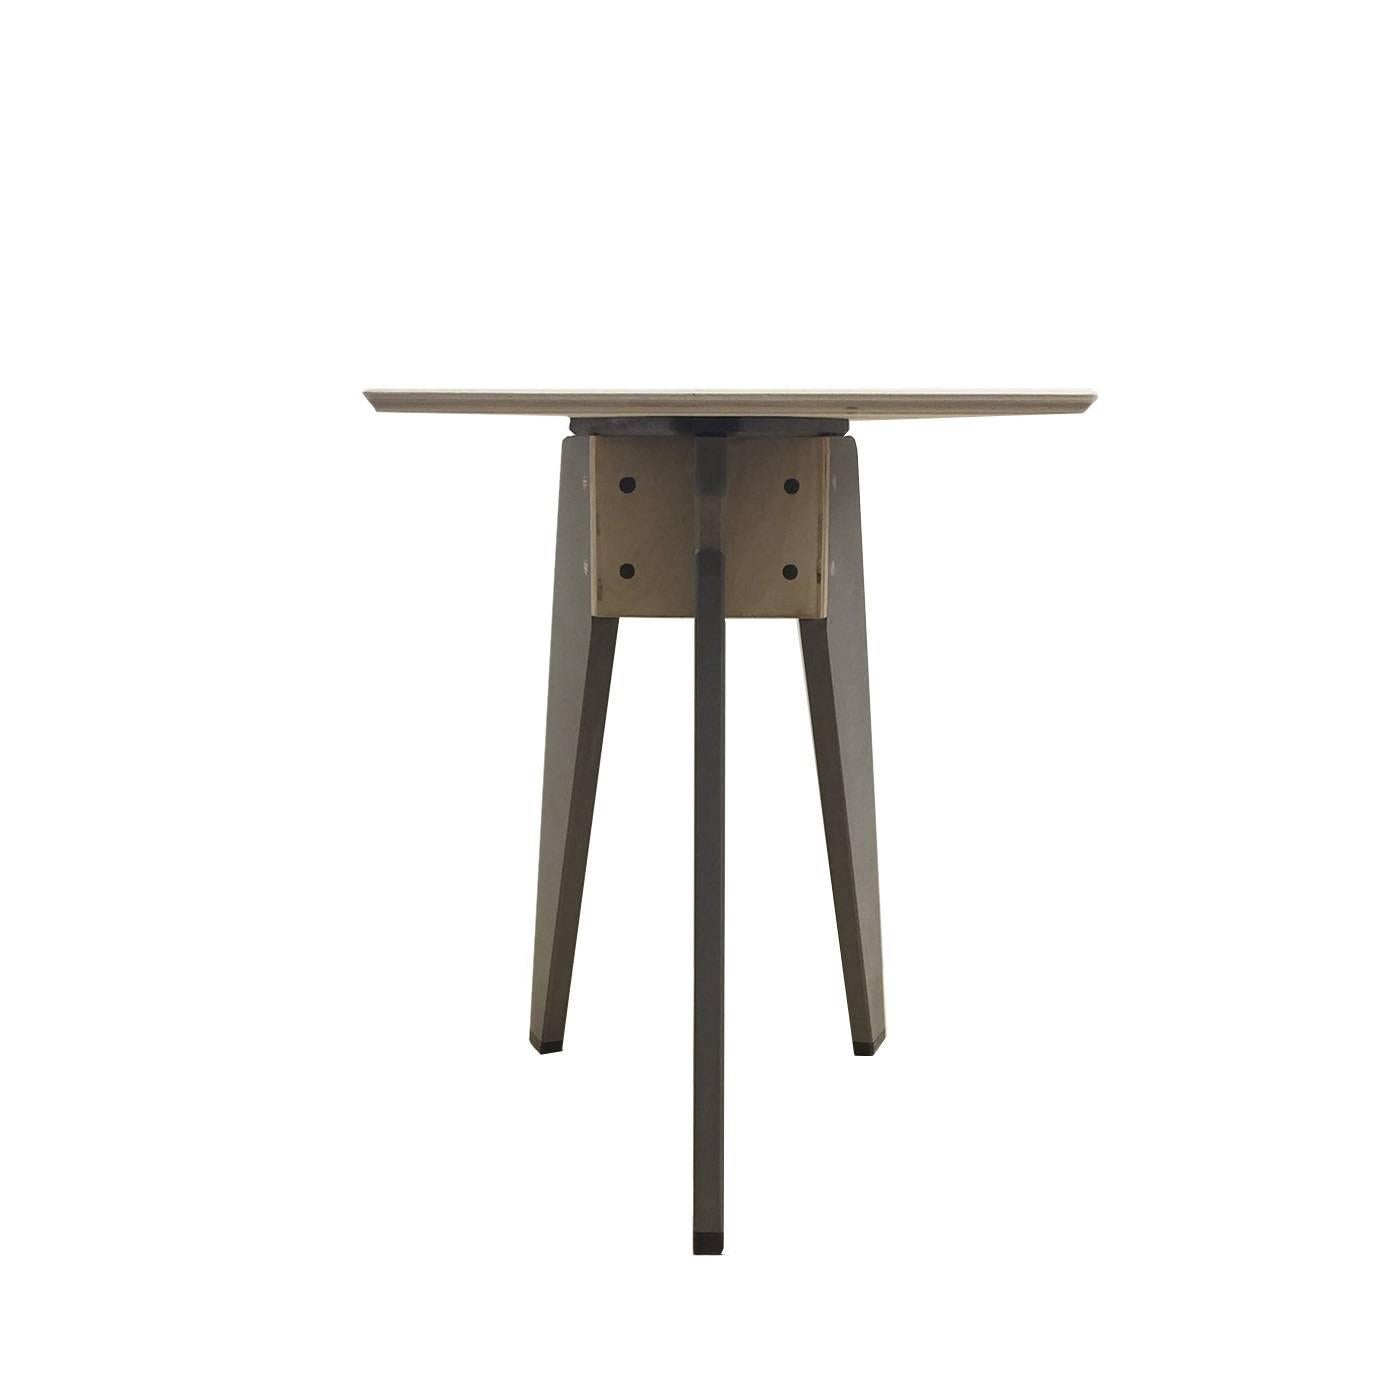 This versatile stool can be used as also as a coffee table and will enrich a modern decor with its subtle elegance. It is part of the LW collection and can be paired with other similar ones from the same series to create a more dynamic effect. Its